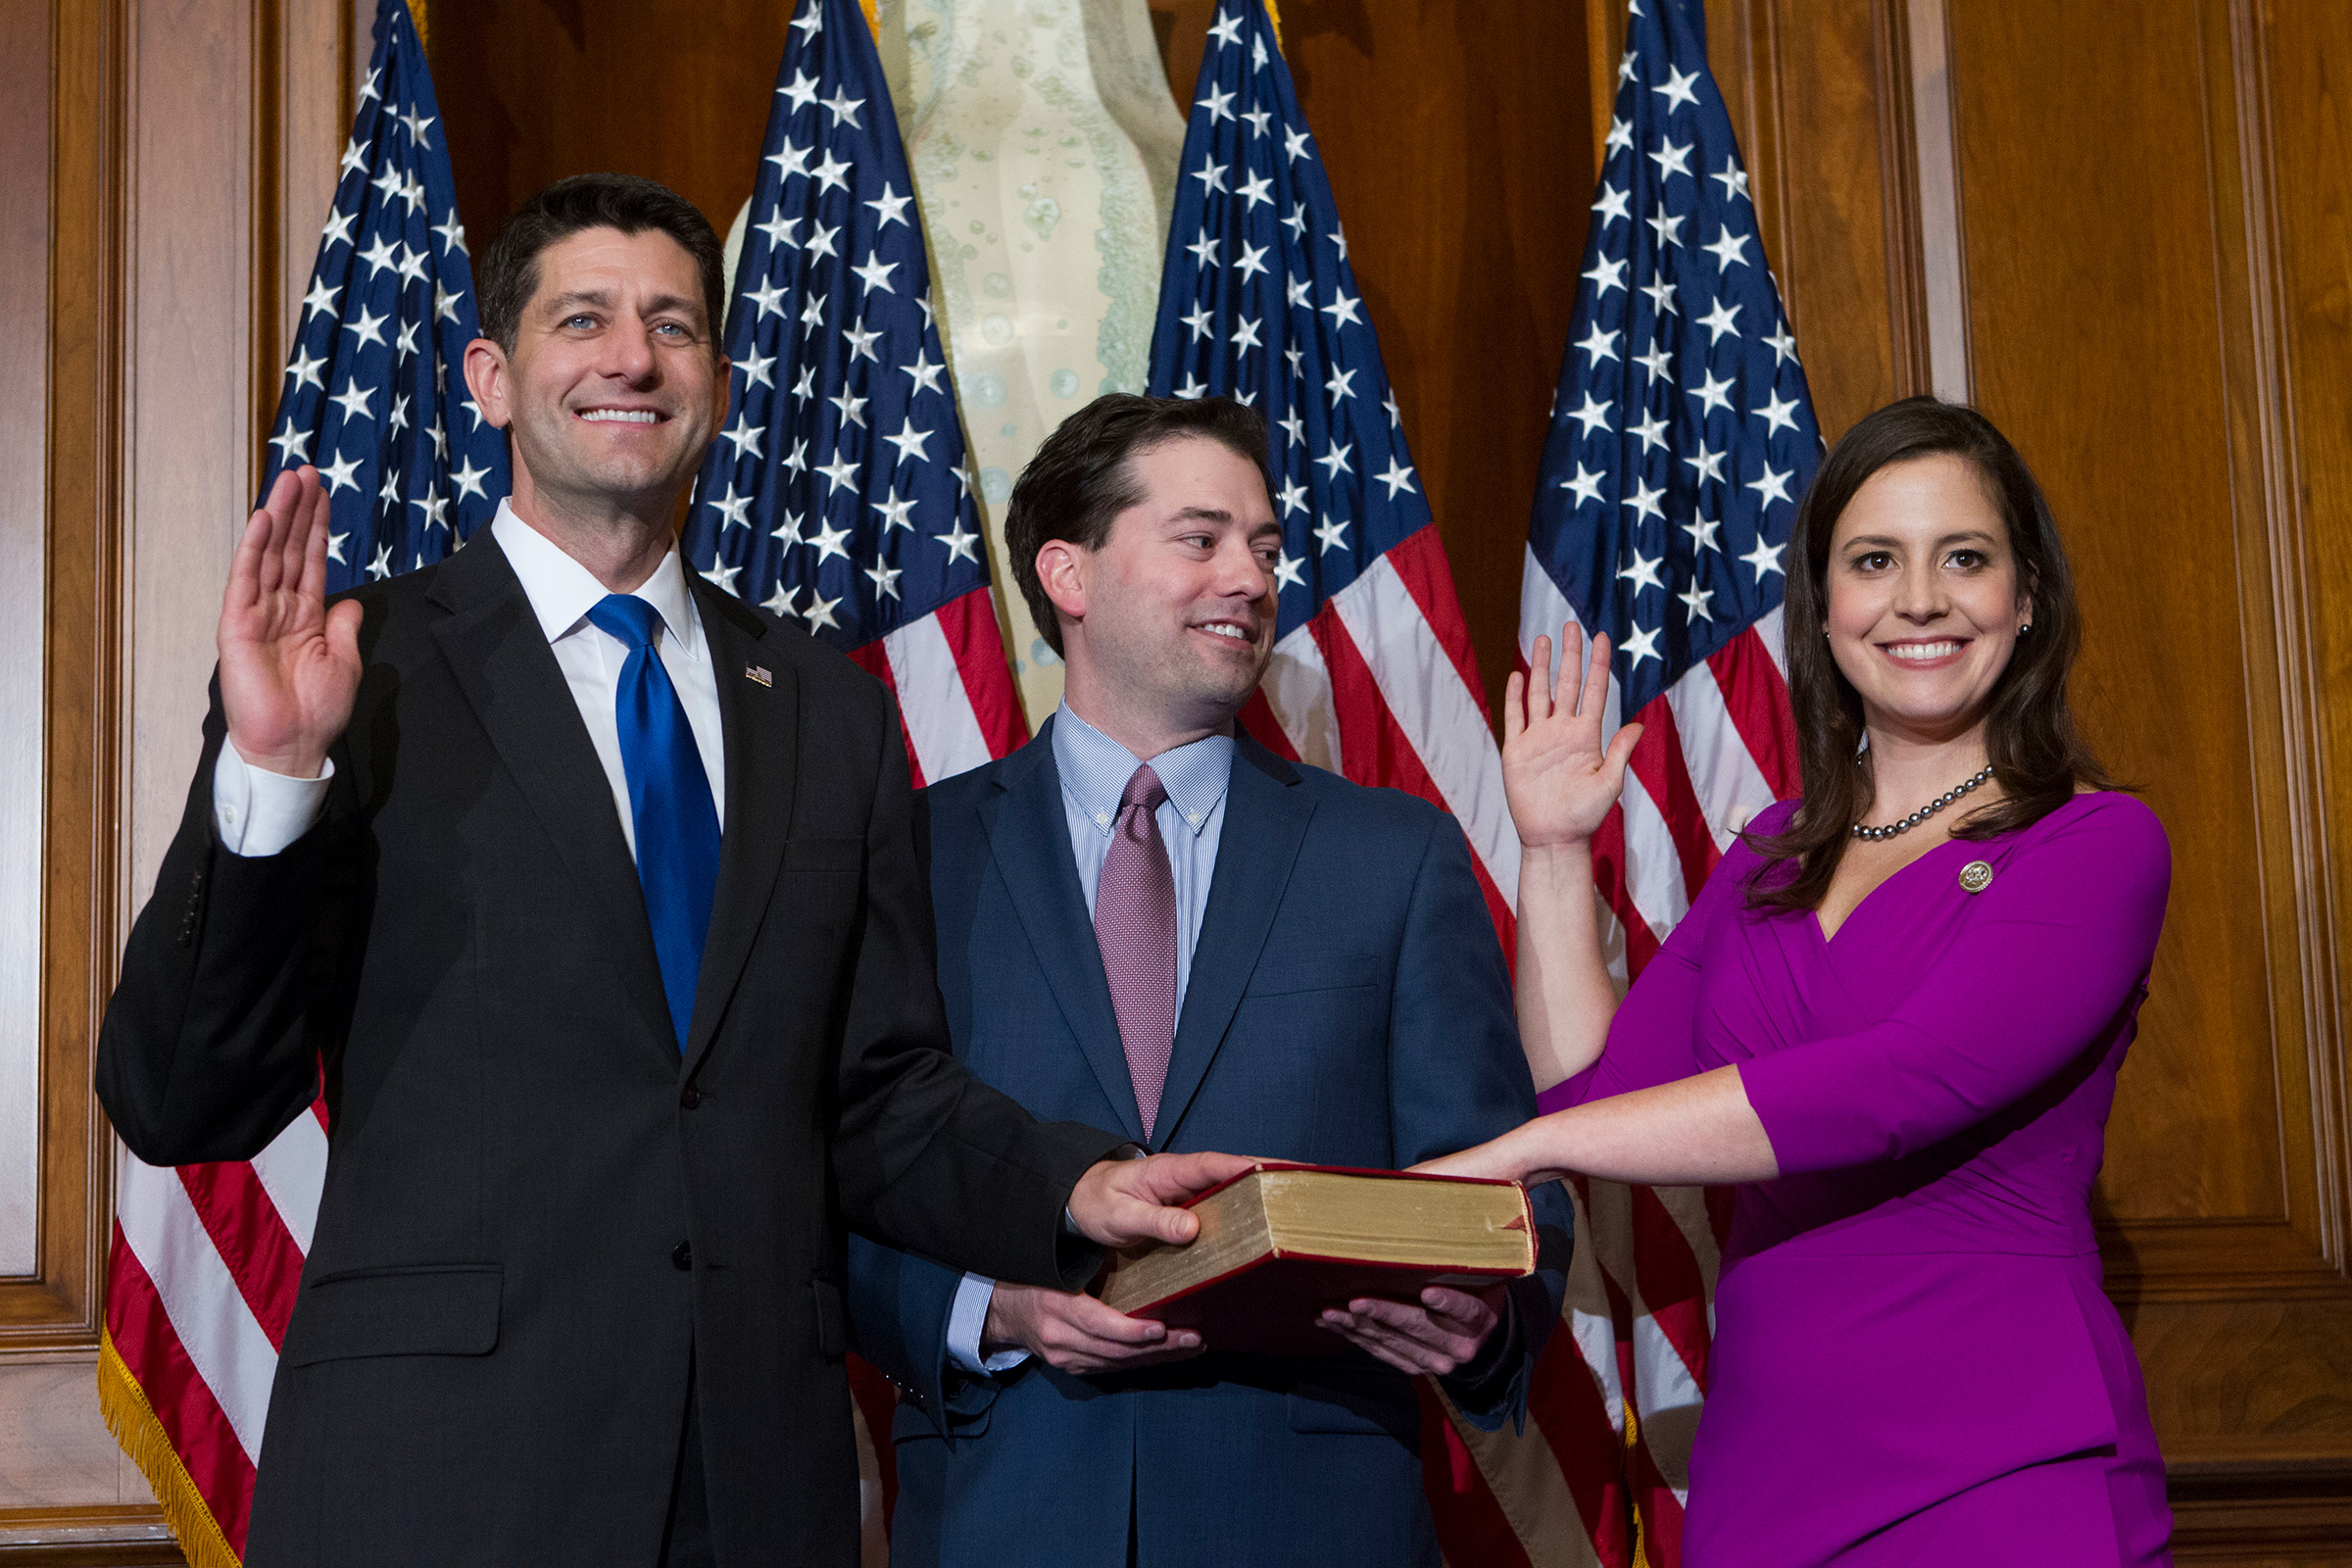 Former House Speaker Paul Ryan administers the House oath of office to Elise Stefanik during a mock swearing in ceremony on Capitol Hill in Washington, Jan. 3, 2017, as the 115th Congress began. (Jose Luis Magana—AP)